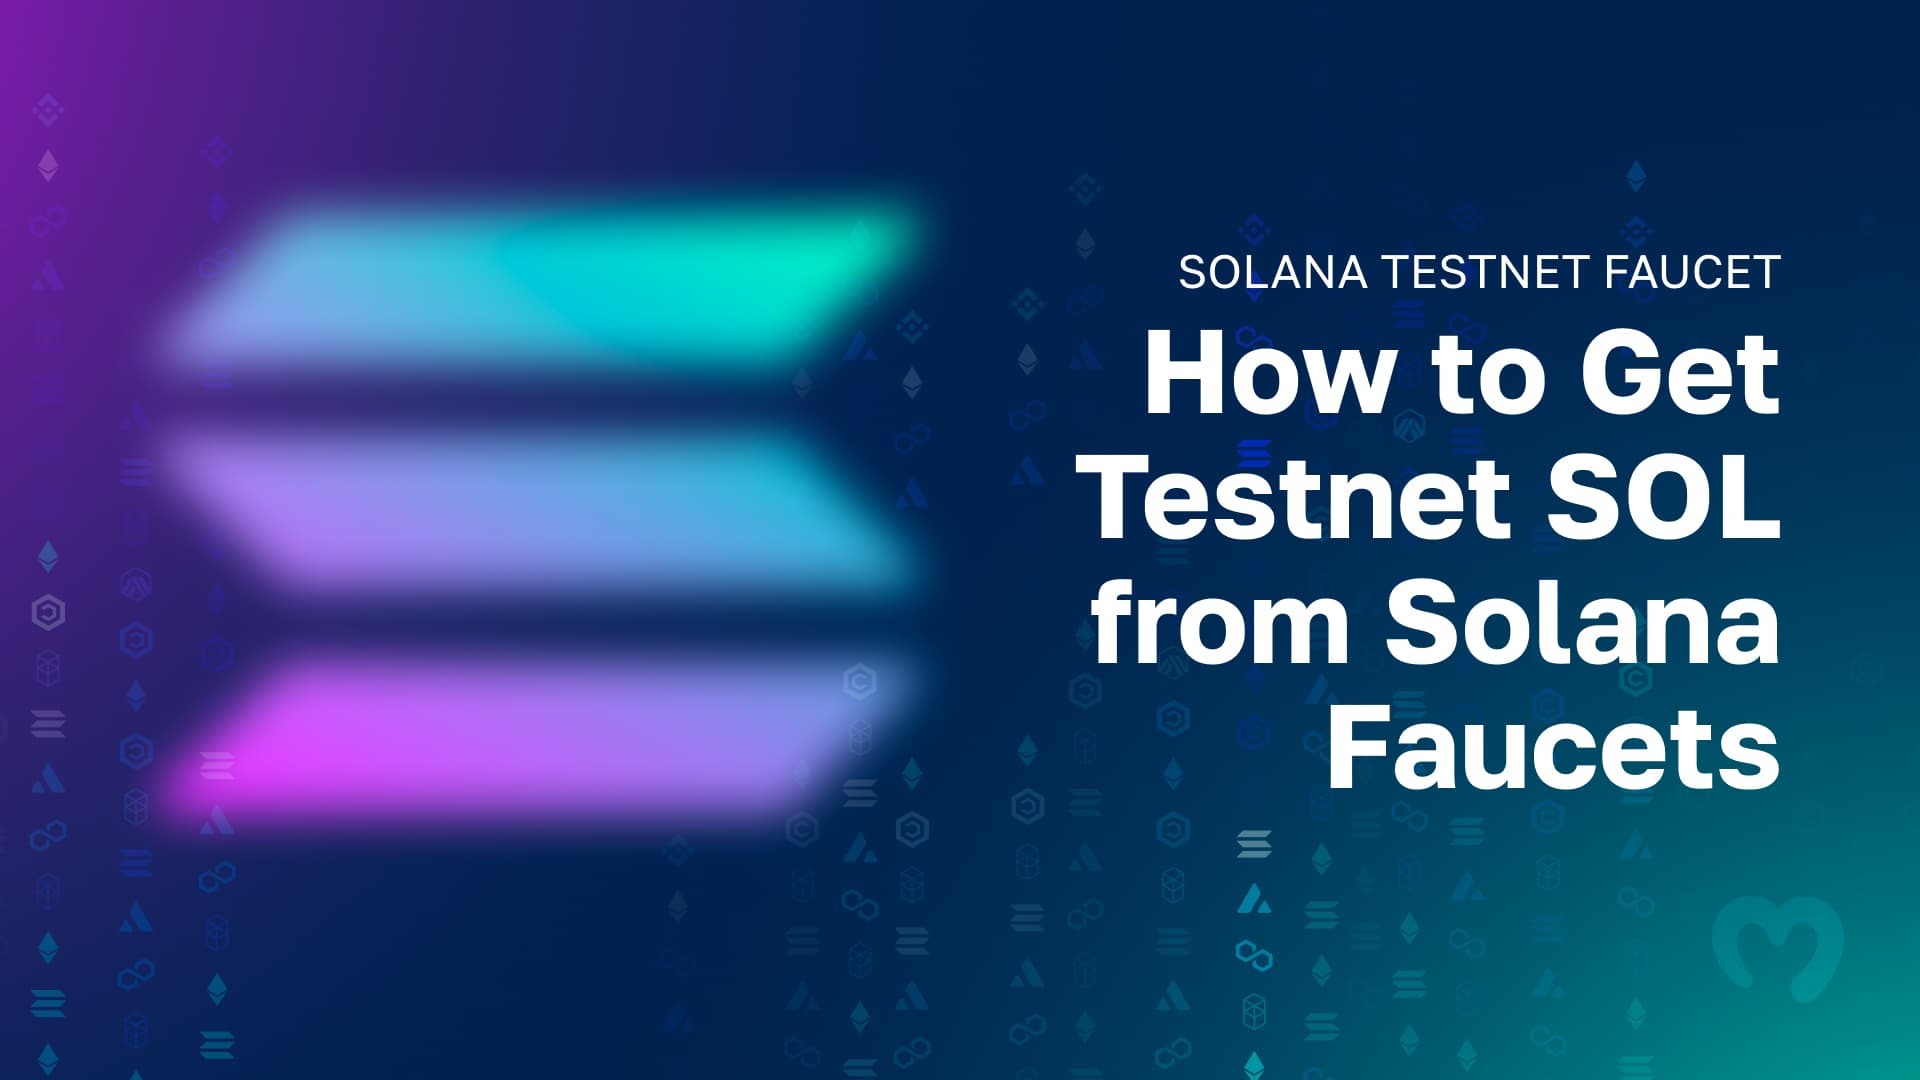 Solana Testnet Faucet - How to Get Testnet SOL from Solana Faucets